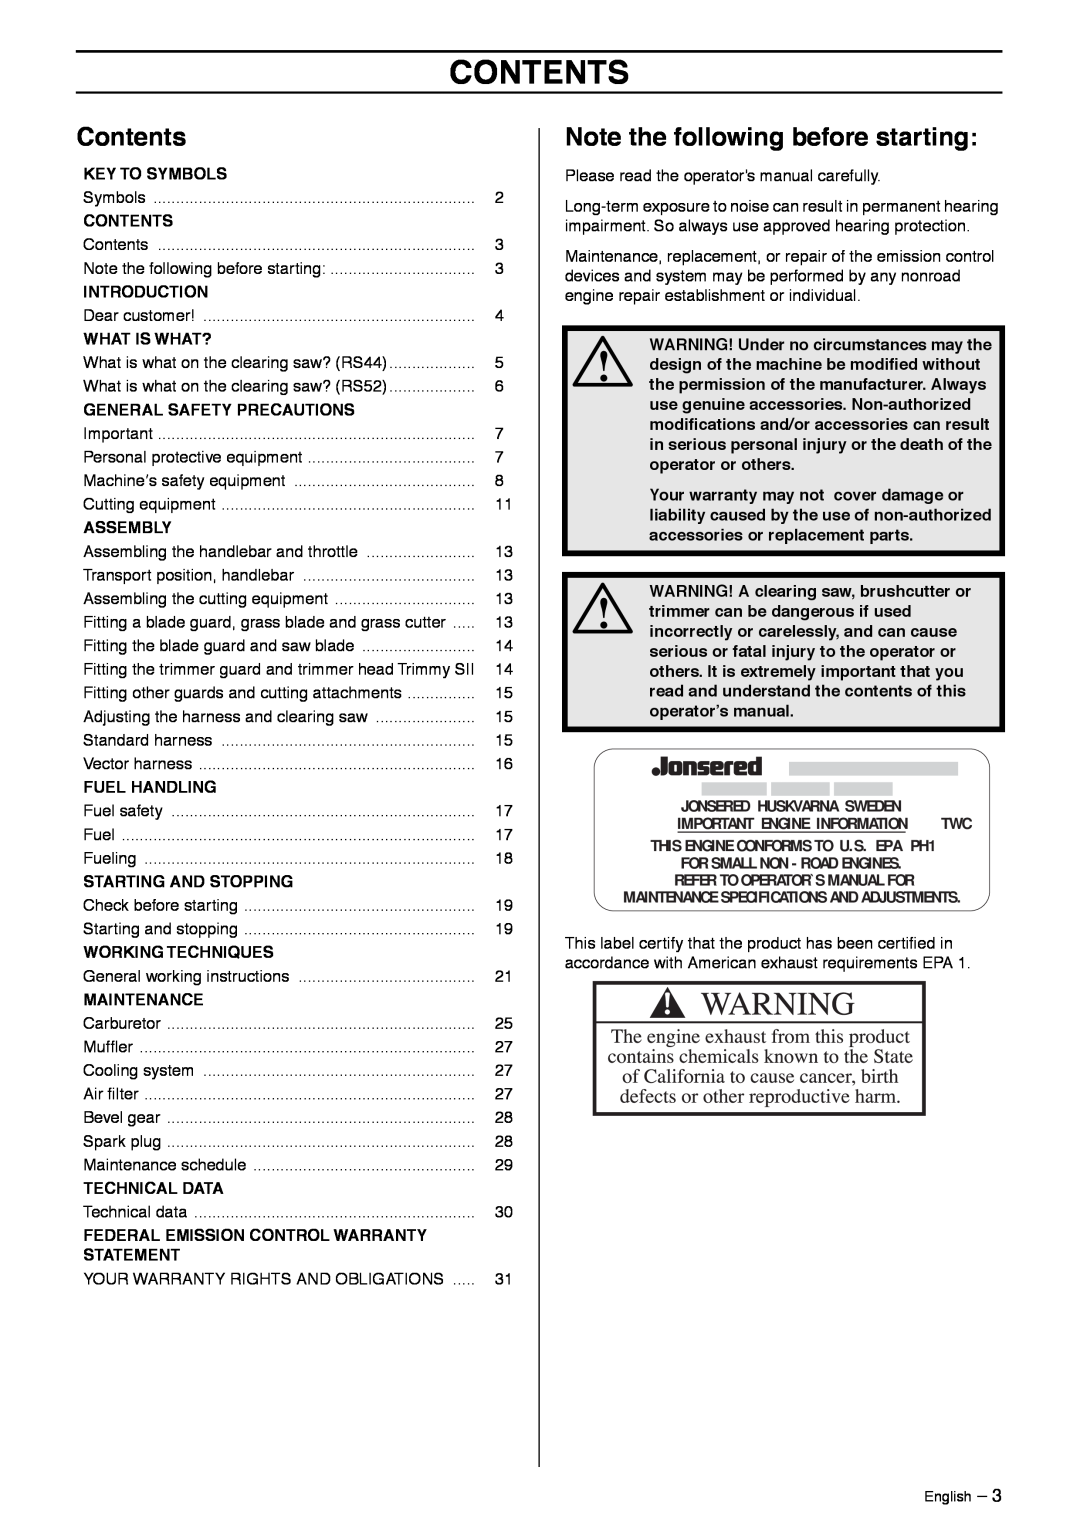 Jonsered GR50 manual Contents, Note the following before starting, Key To Symbols, Introduction, What Is What?, Assembly 